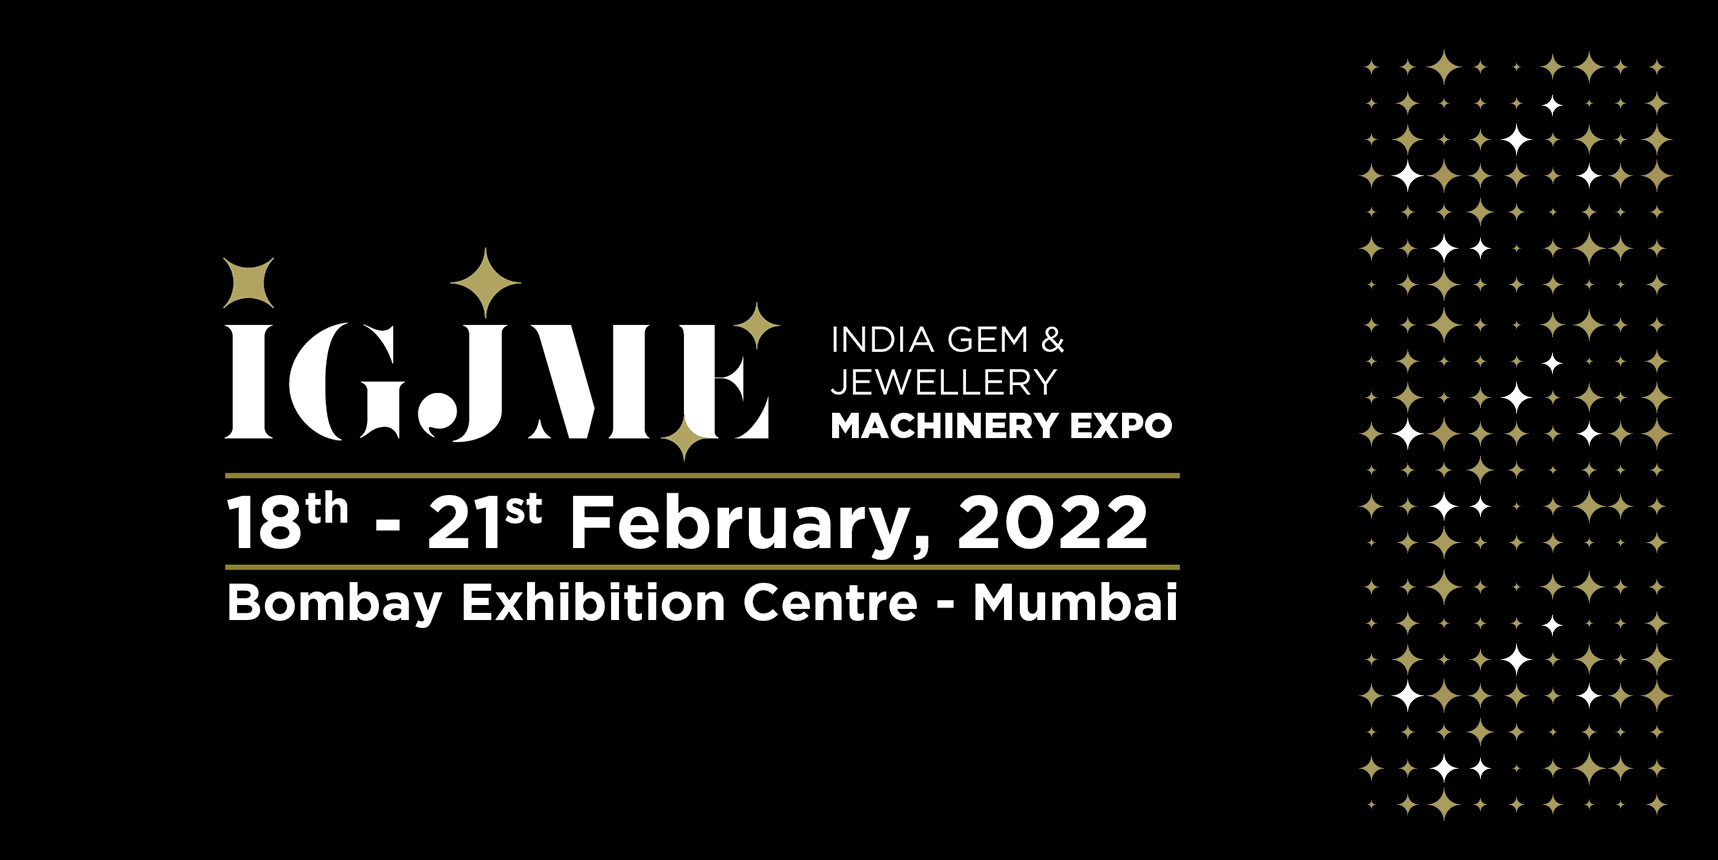 14th IIJS Signature & 8th India Gem & Jewellery Machinery Expo (IGJME) from 18th to 21st February 2022 at Bombay Exhibition Centre, NESCO